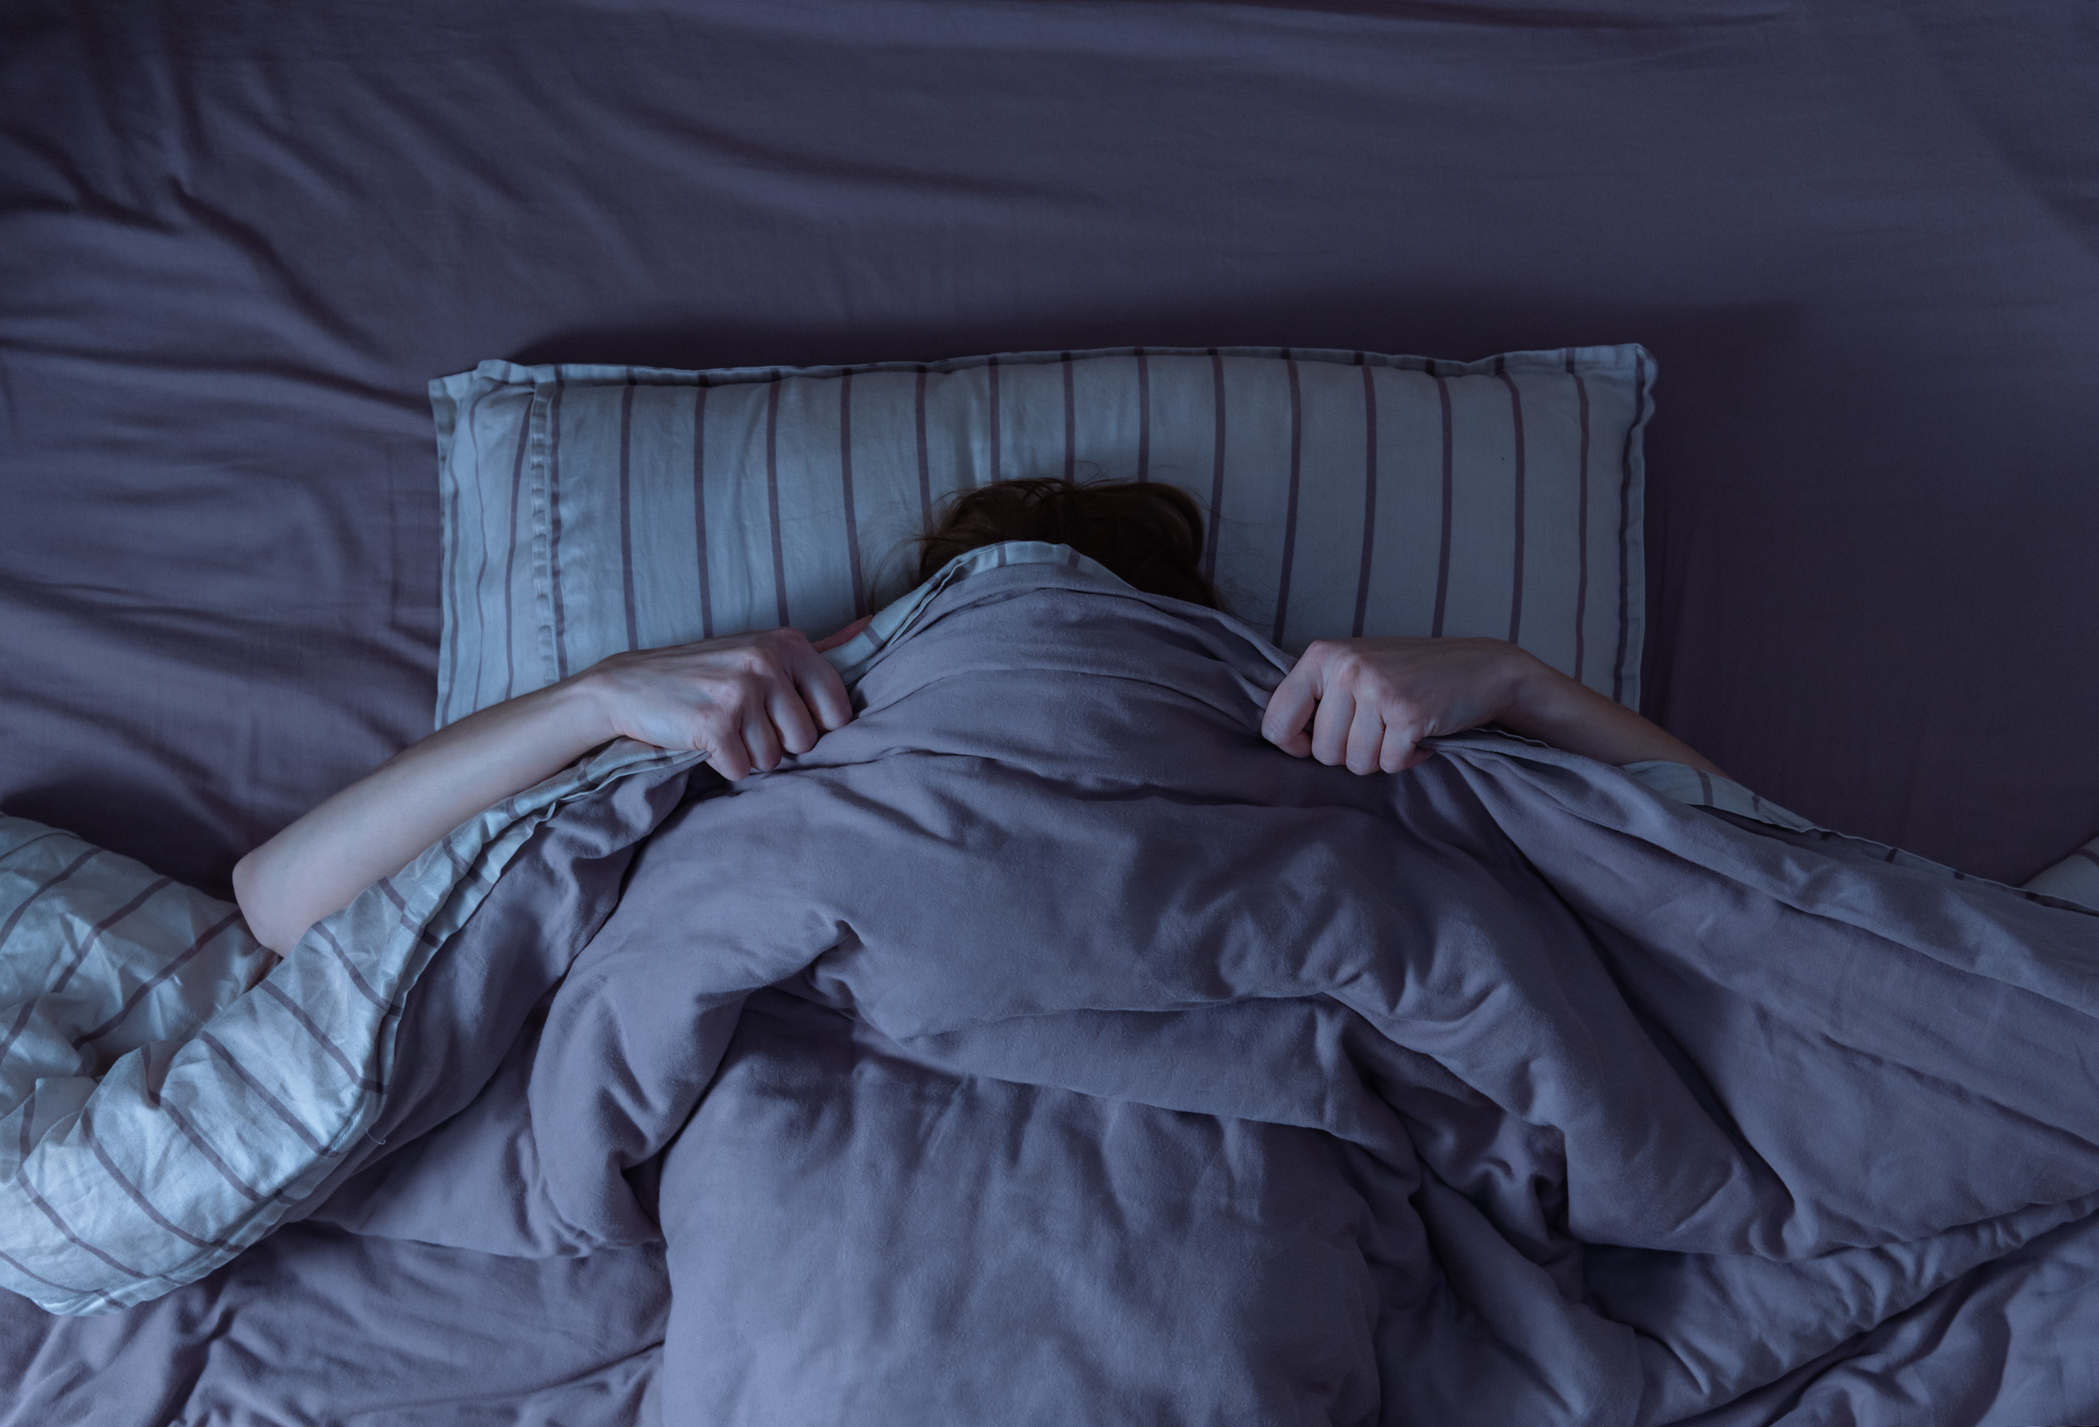 Sleeping five hours or less? Meet your long-term health risks